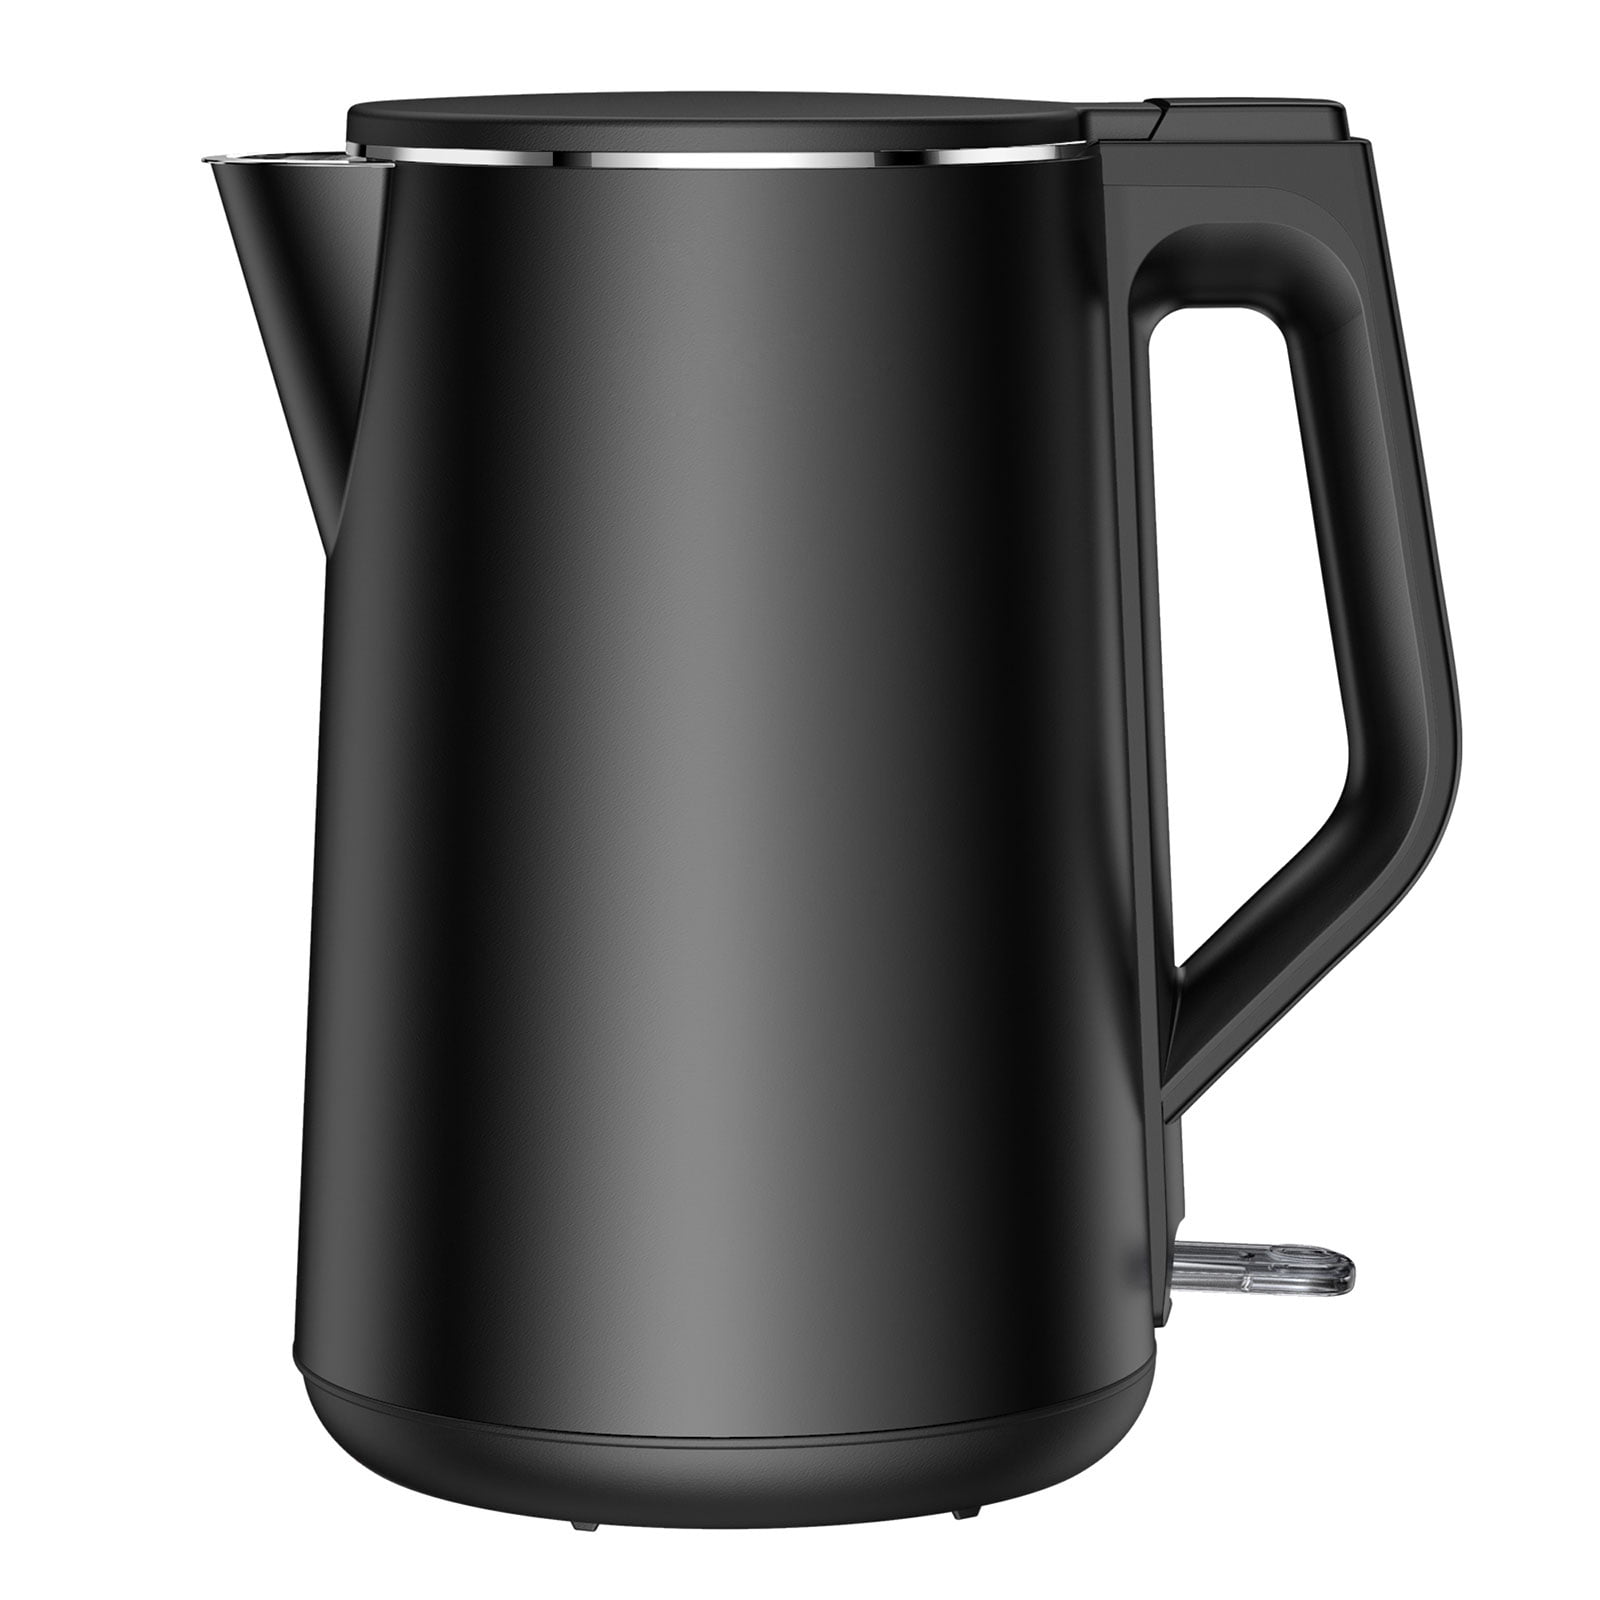 Double Wall Electric Kettle - Black 37 oz - The Republic of Tea | Double Wall Electric Kettle - 37 oz